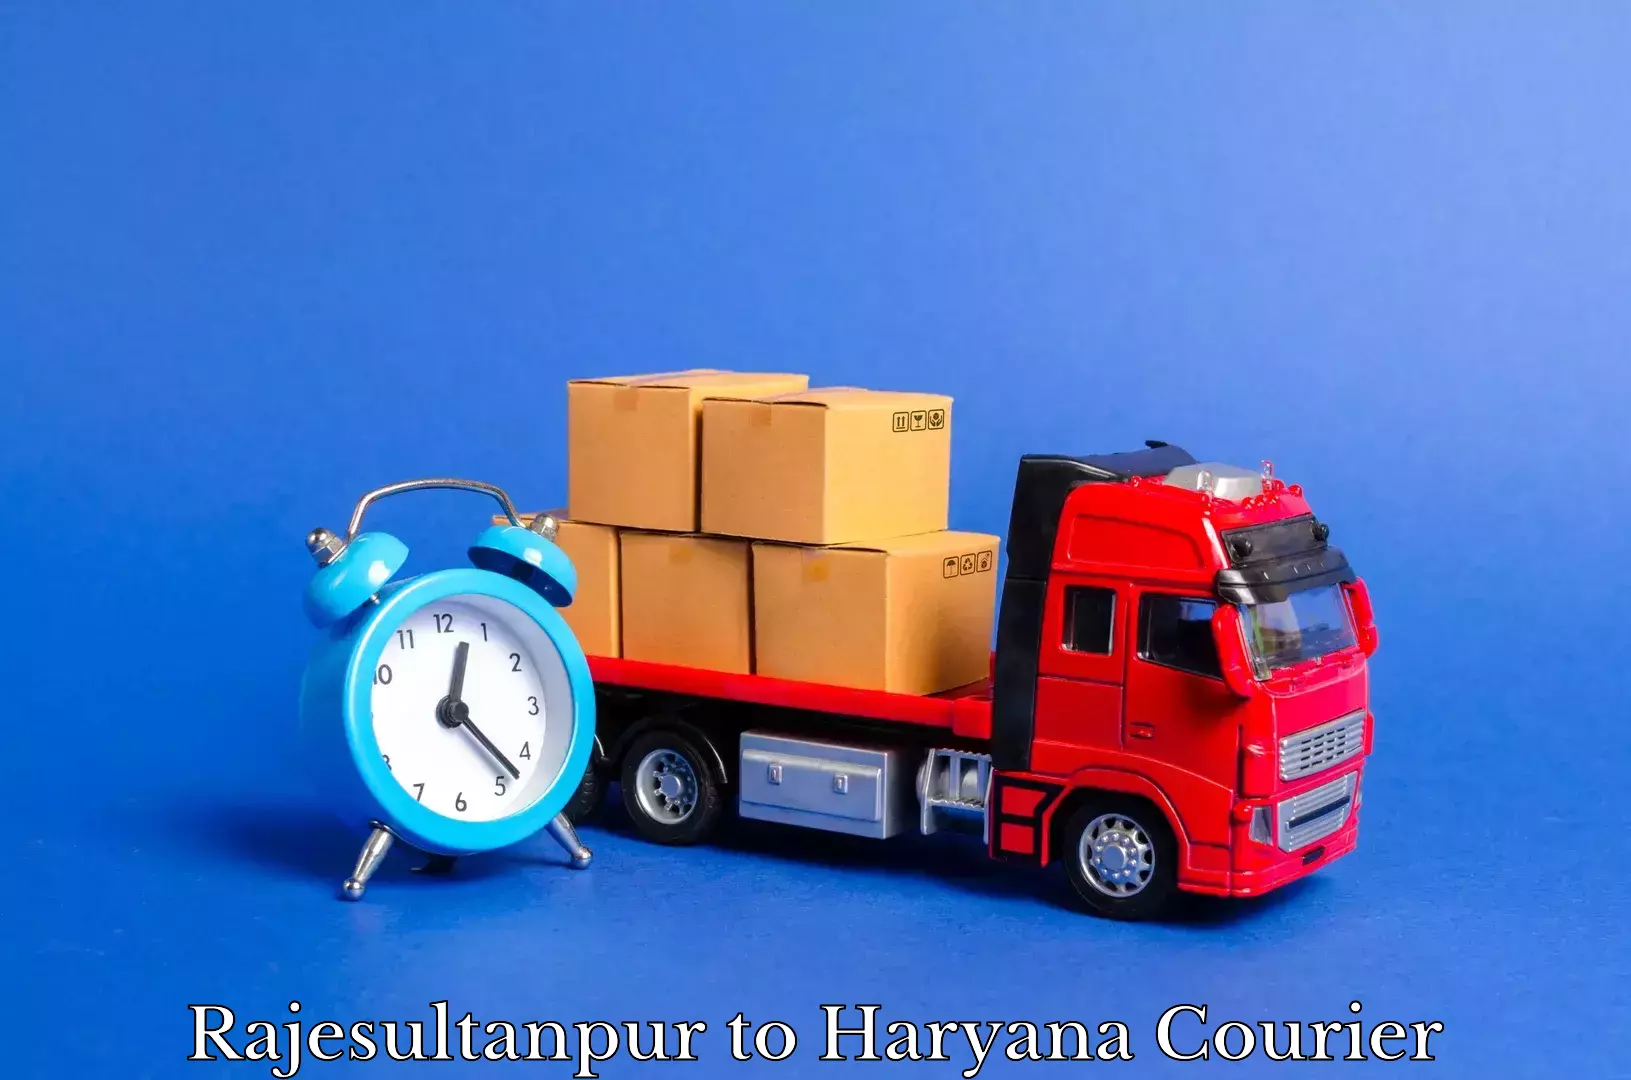 Budget-friendly movers Rajesultanpur to Pinjore